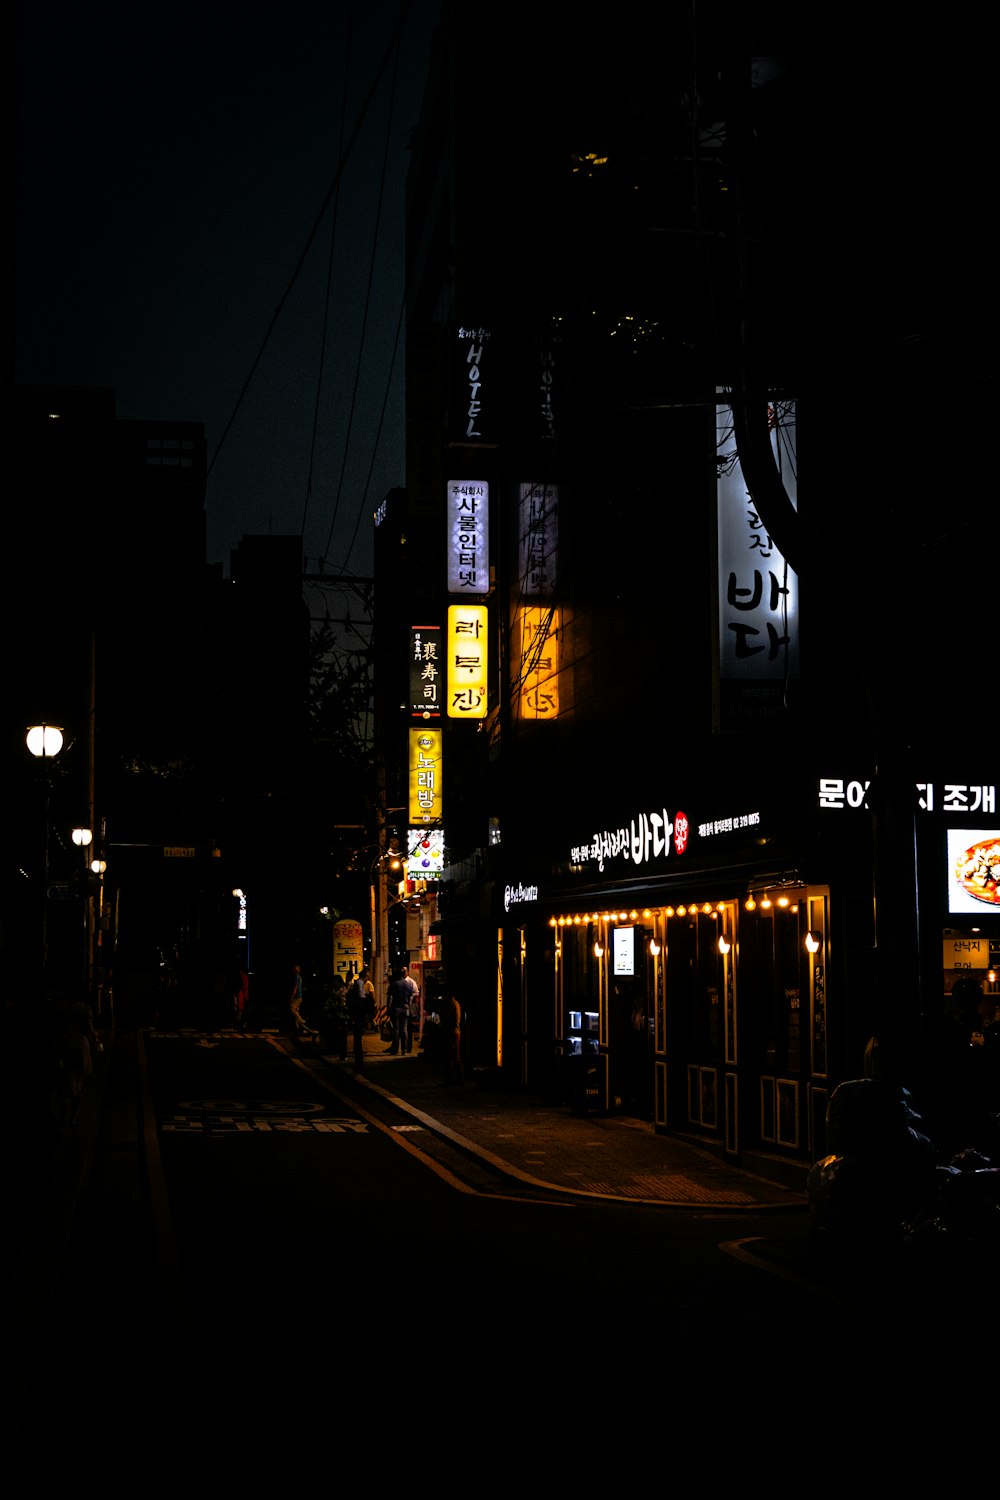 a dark city street at night with neon signs